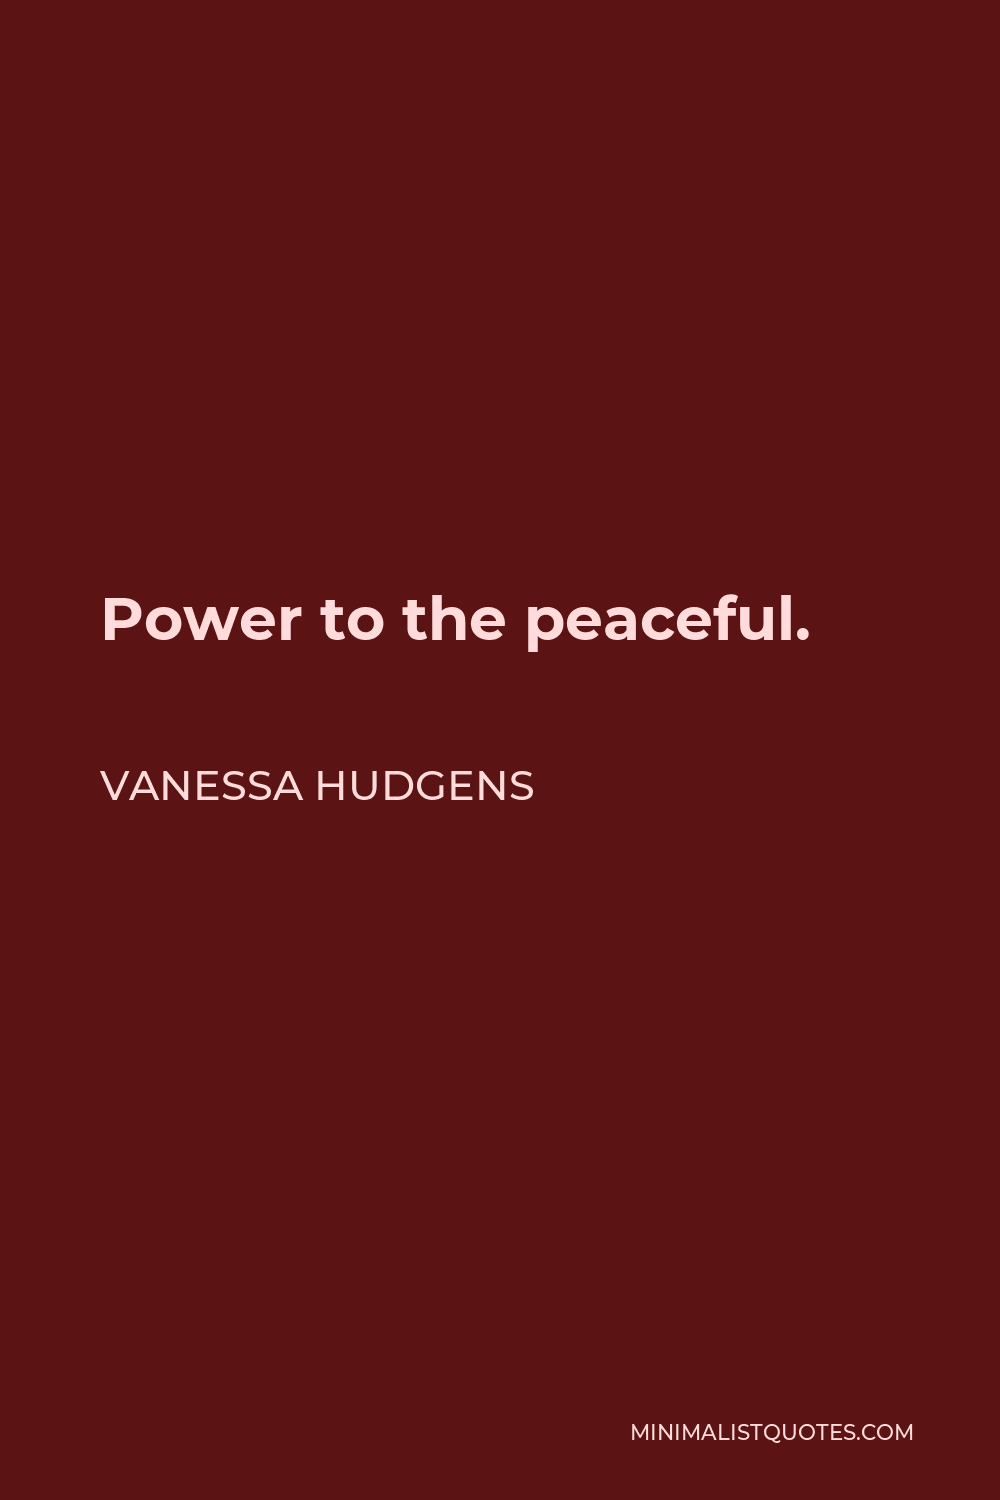 Vanessa Hudgens Quote - Power to the peaceful.